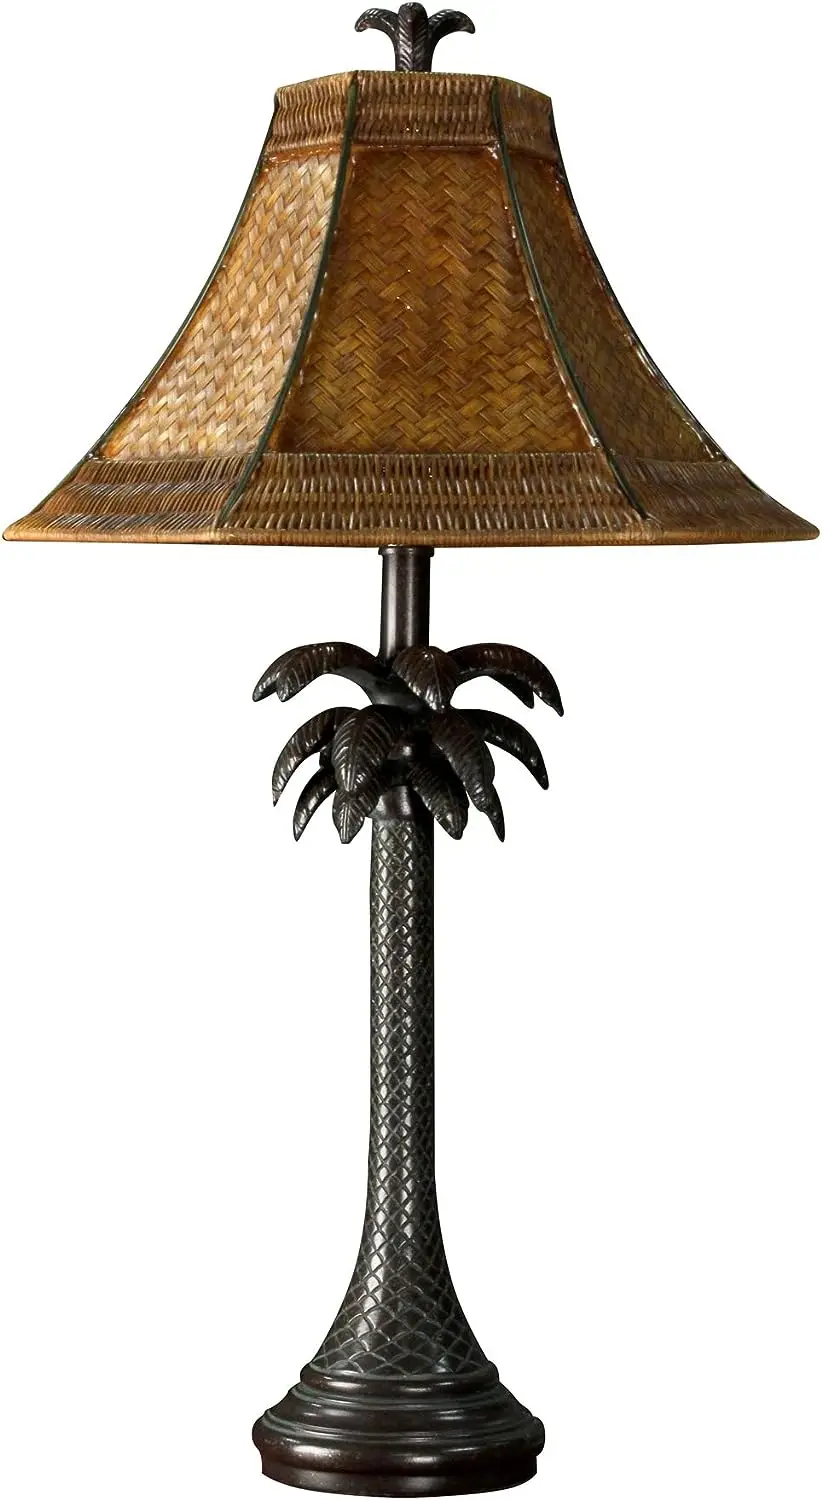 

Tropical Palm Tree Steel , Dark Brown Finish with Woven Rattan Shade